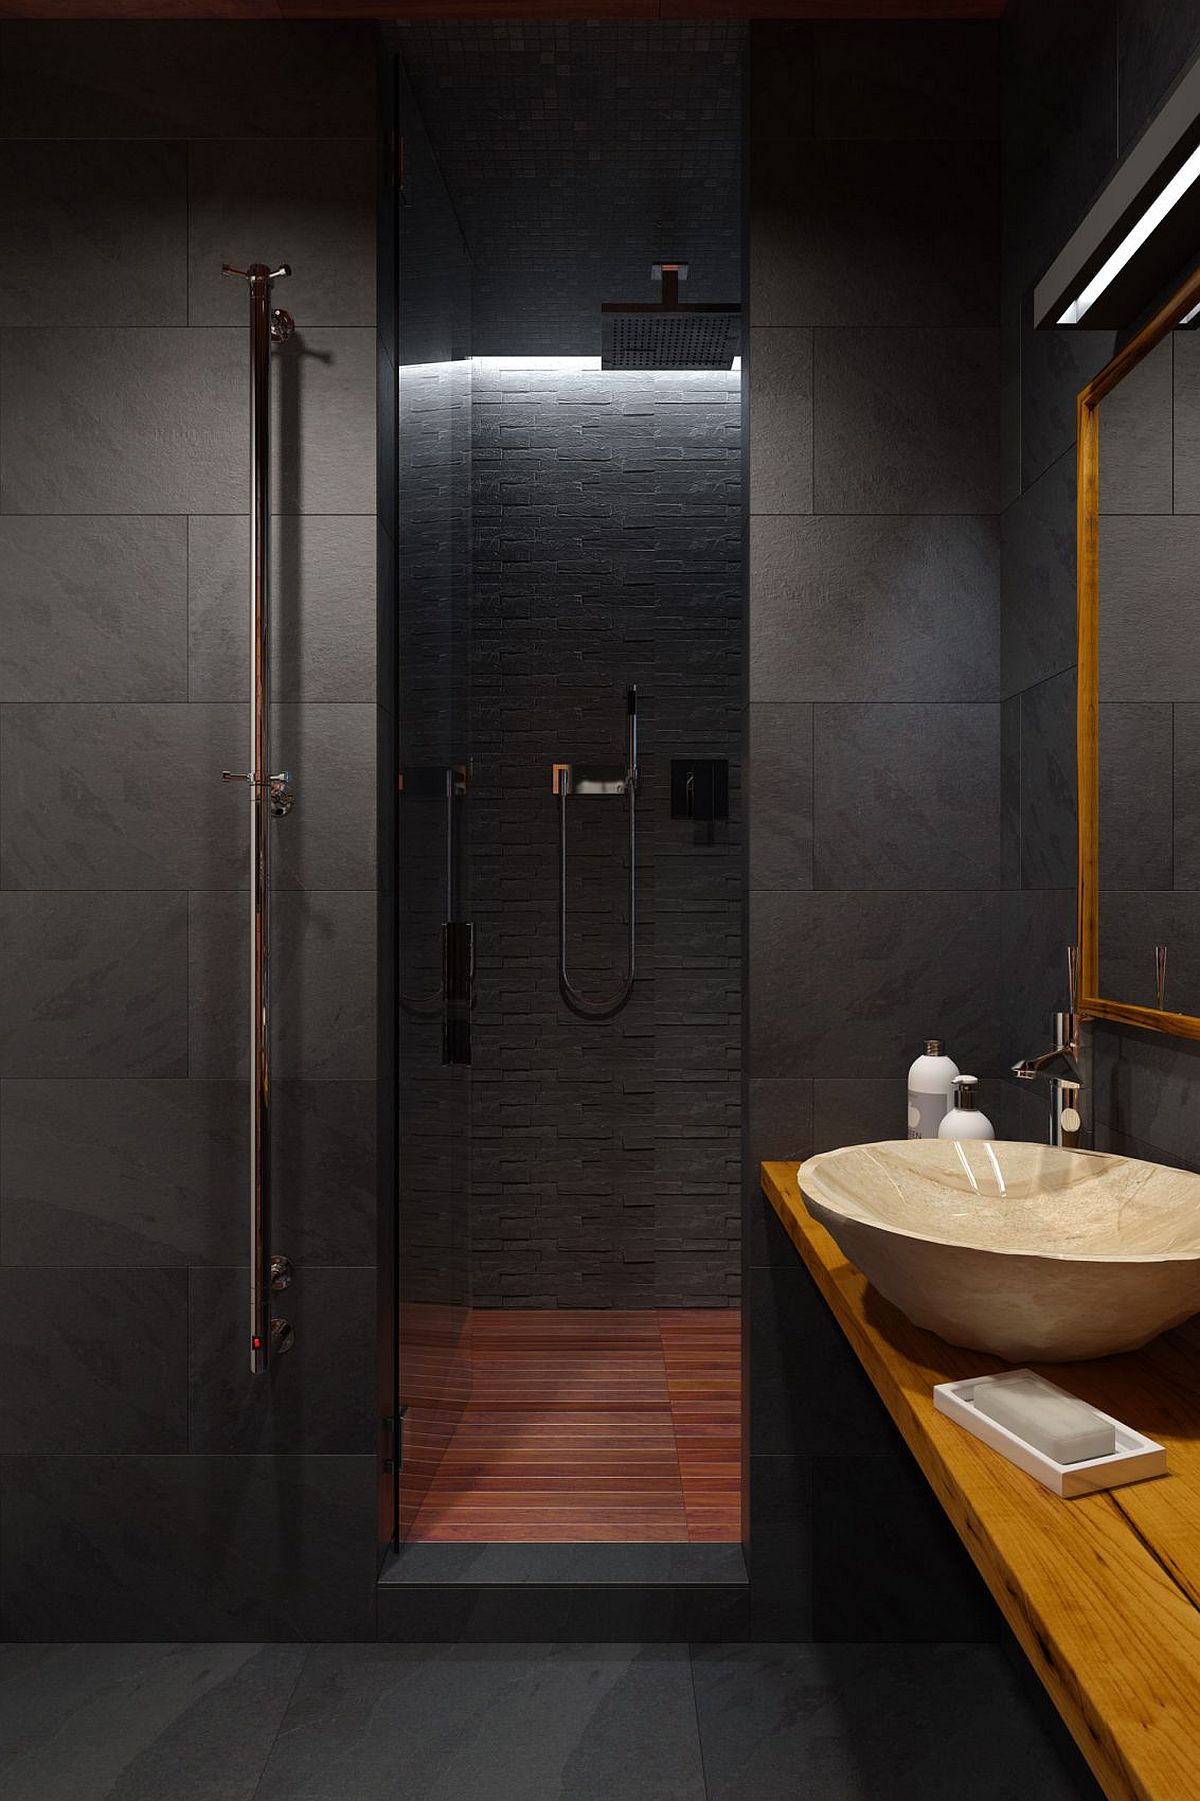 Shower area of the small bathroom inside the stylish bachlor loft clad in slate and teak